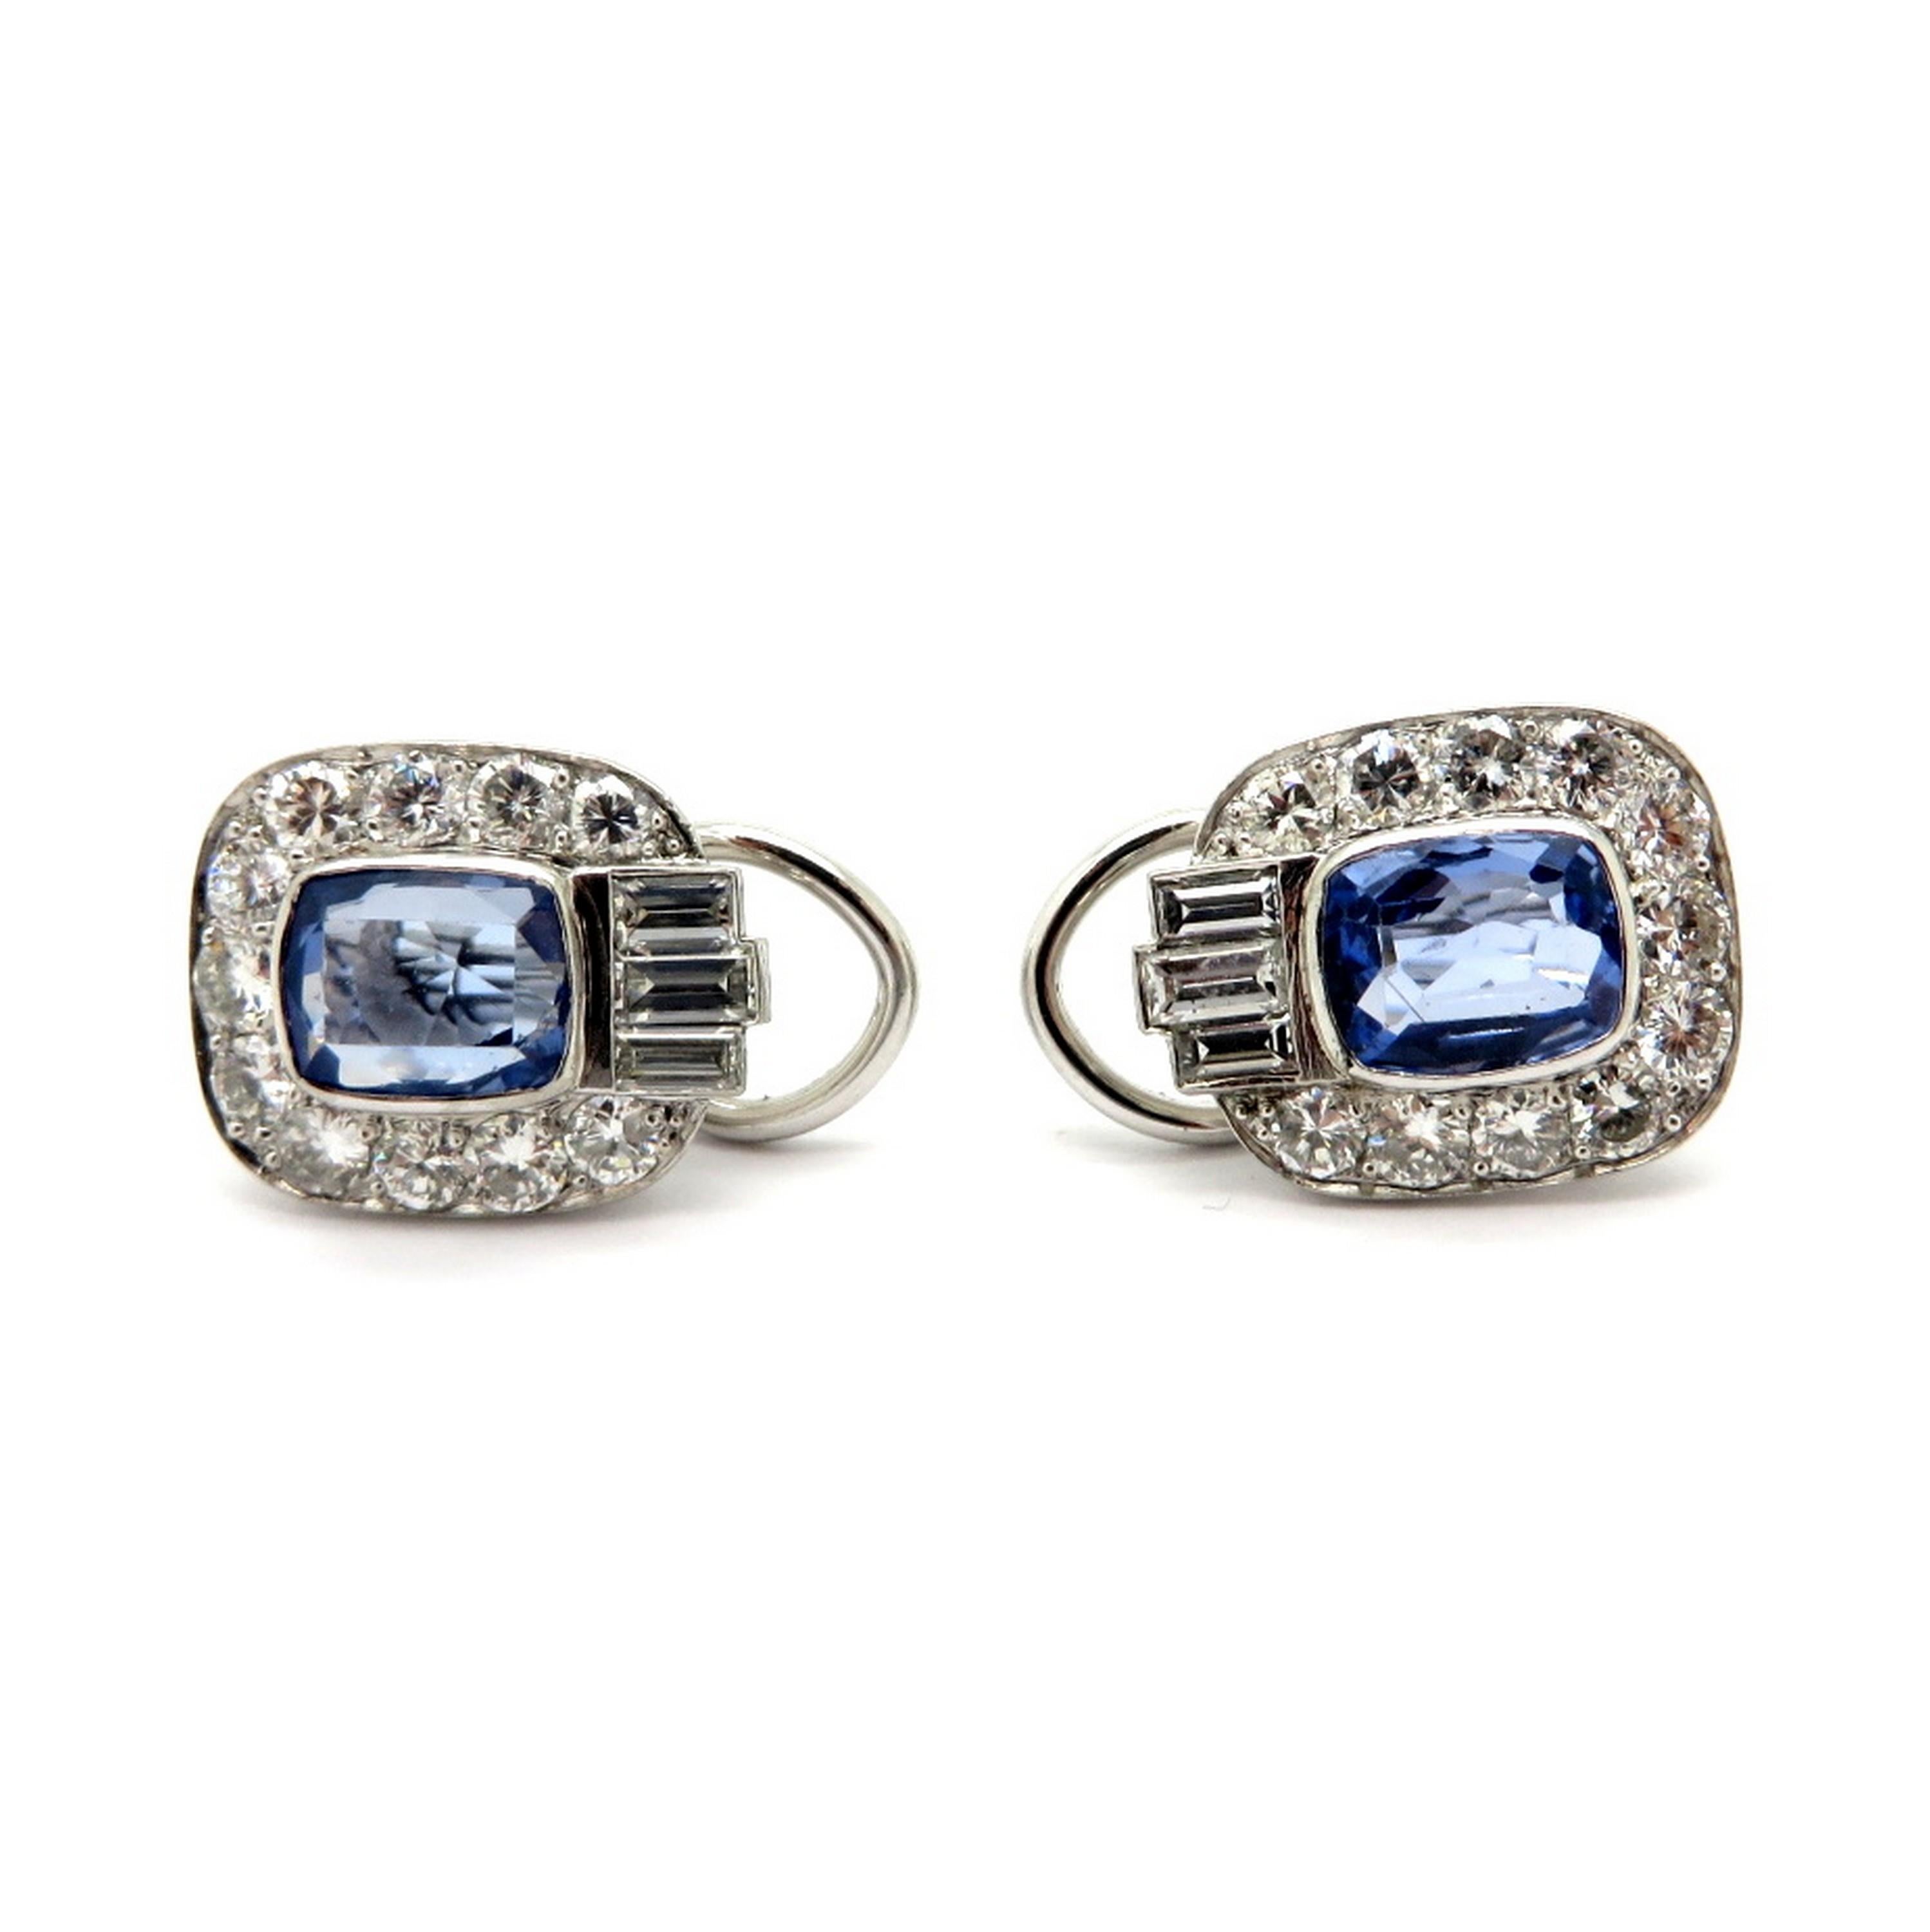 Estate platinum ceylon sapphire, round, and baguette diamond clip on earrings.  Showcasing two bezel set fine quality ceylon blue cushion cut sapphires weighing approximately 3.00 carats total.  Accented with 22 round brilliant cut micro prong set